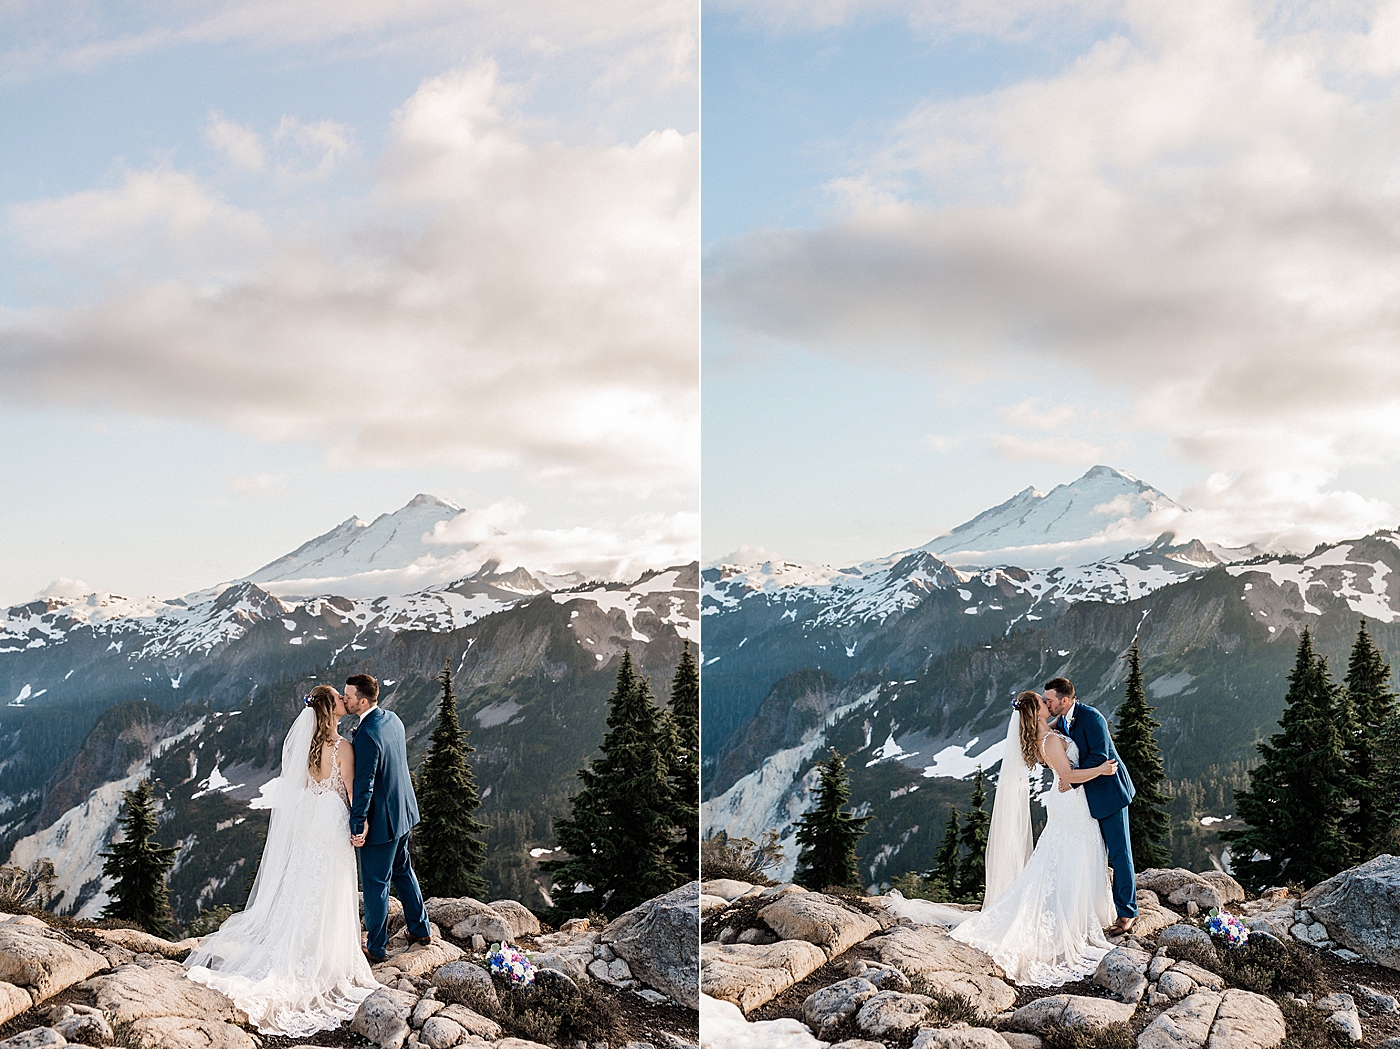 First kiss after elopement at Artist Point. Photos by Megan Montalvo Photography.